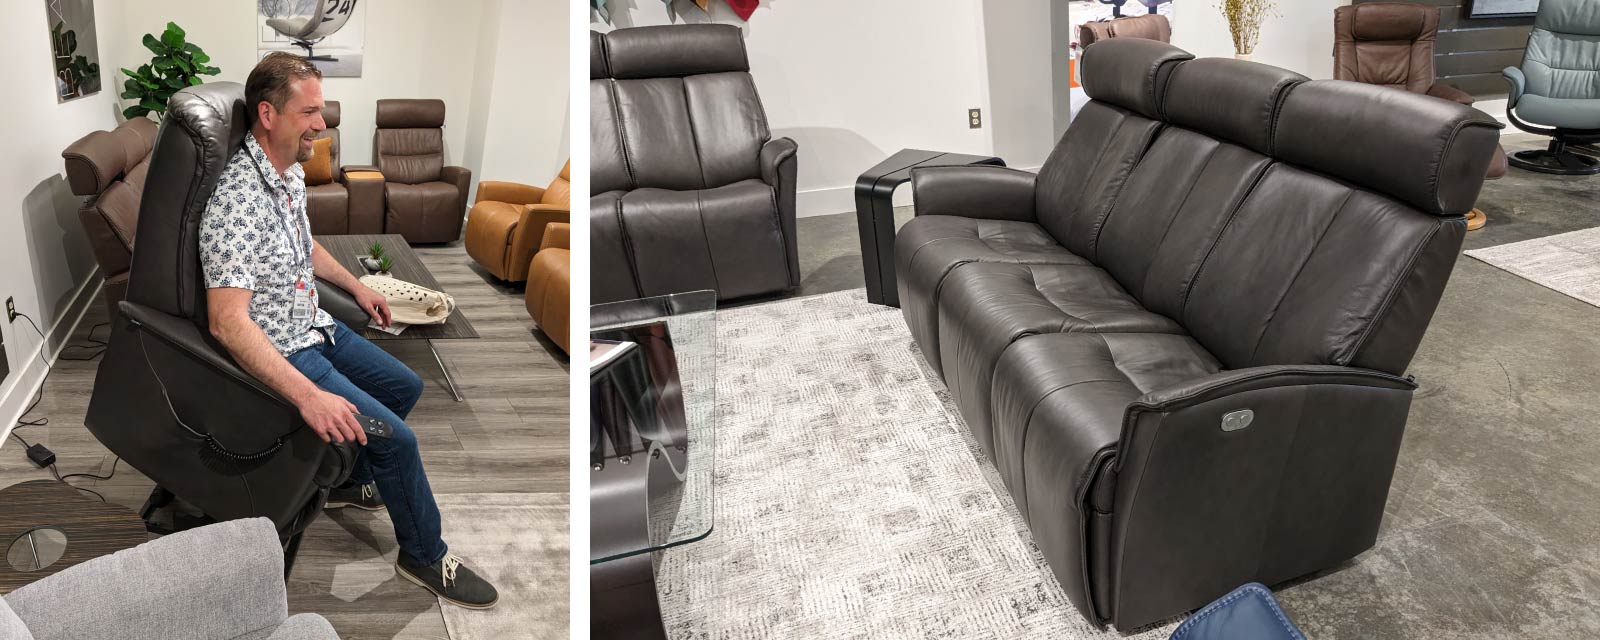 Motorized sofas and recliners in leather from Fjords